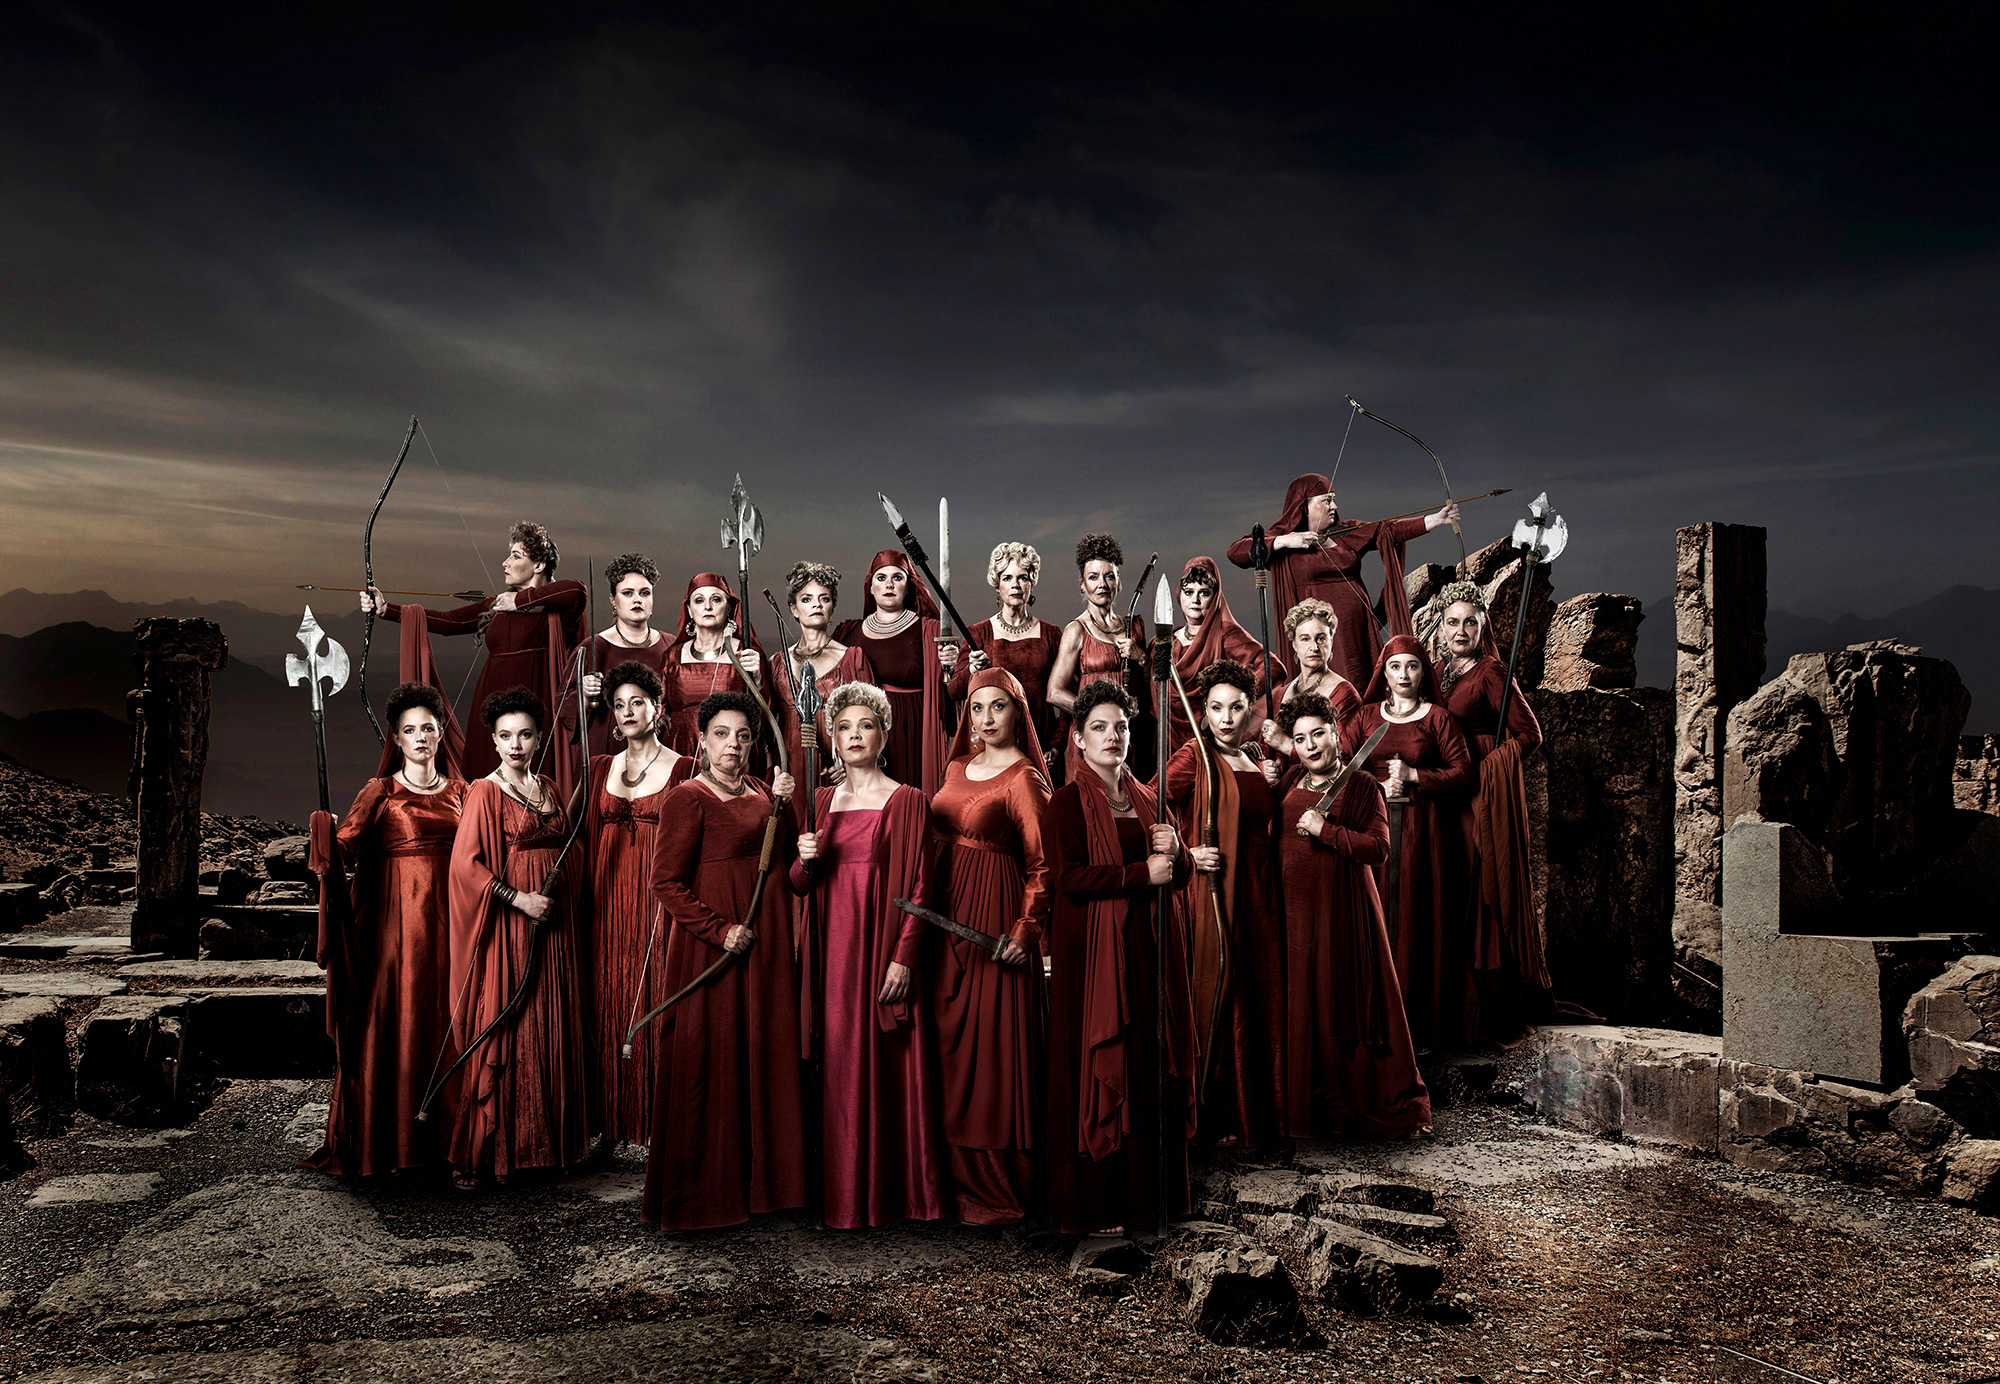 A choir donned in red robes, holding weapons; bows, swords and other medieval weapons are visible. They stand on rocky ground with ruins and a dark sky in the background. They are on an uneven, rocky surface that appears to be ruins. The backdrop presents a dark, stormy sky, creating a gloomy atmosphere.